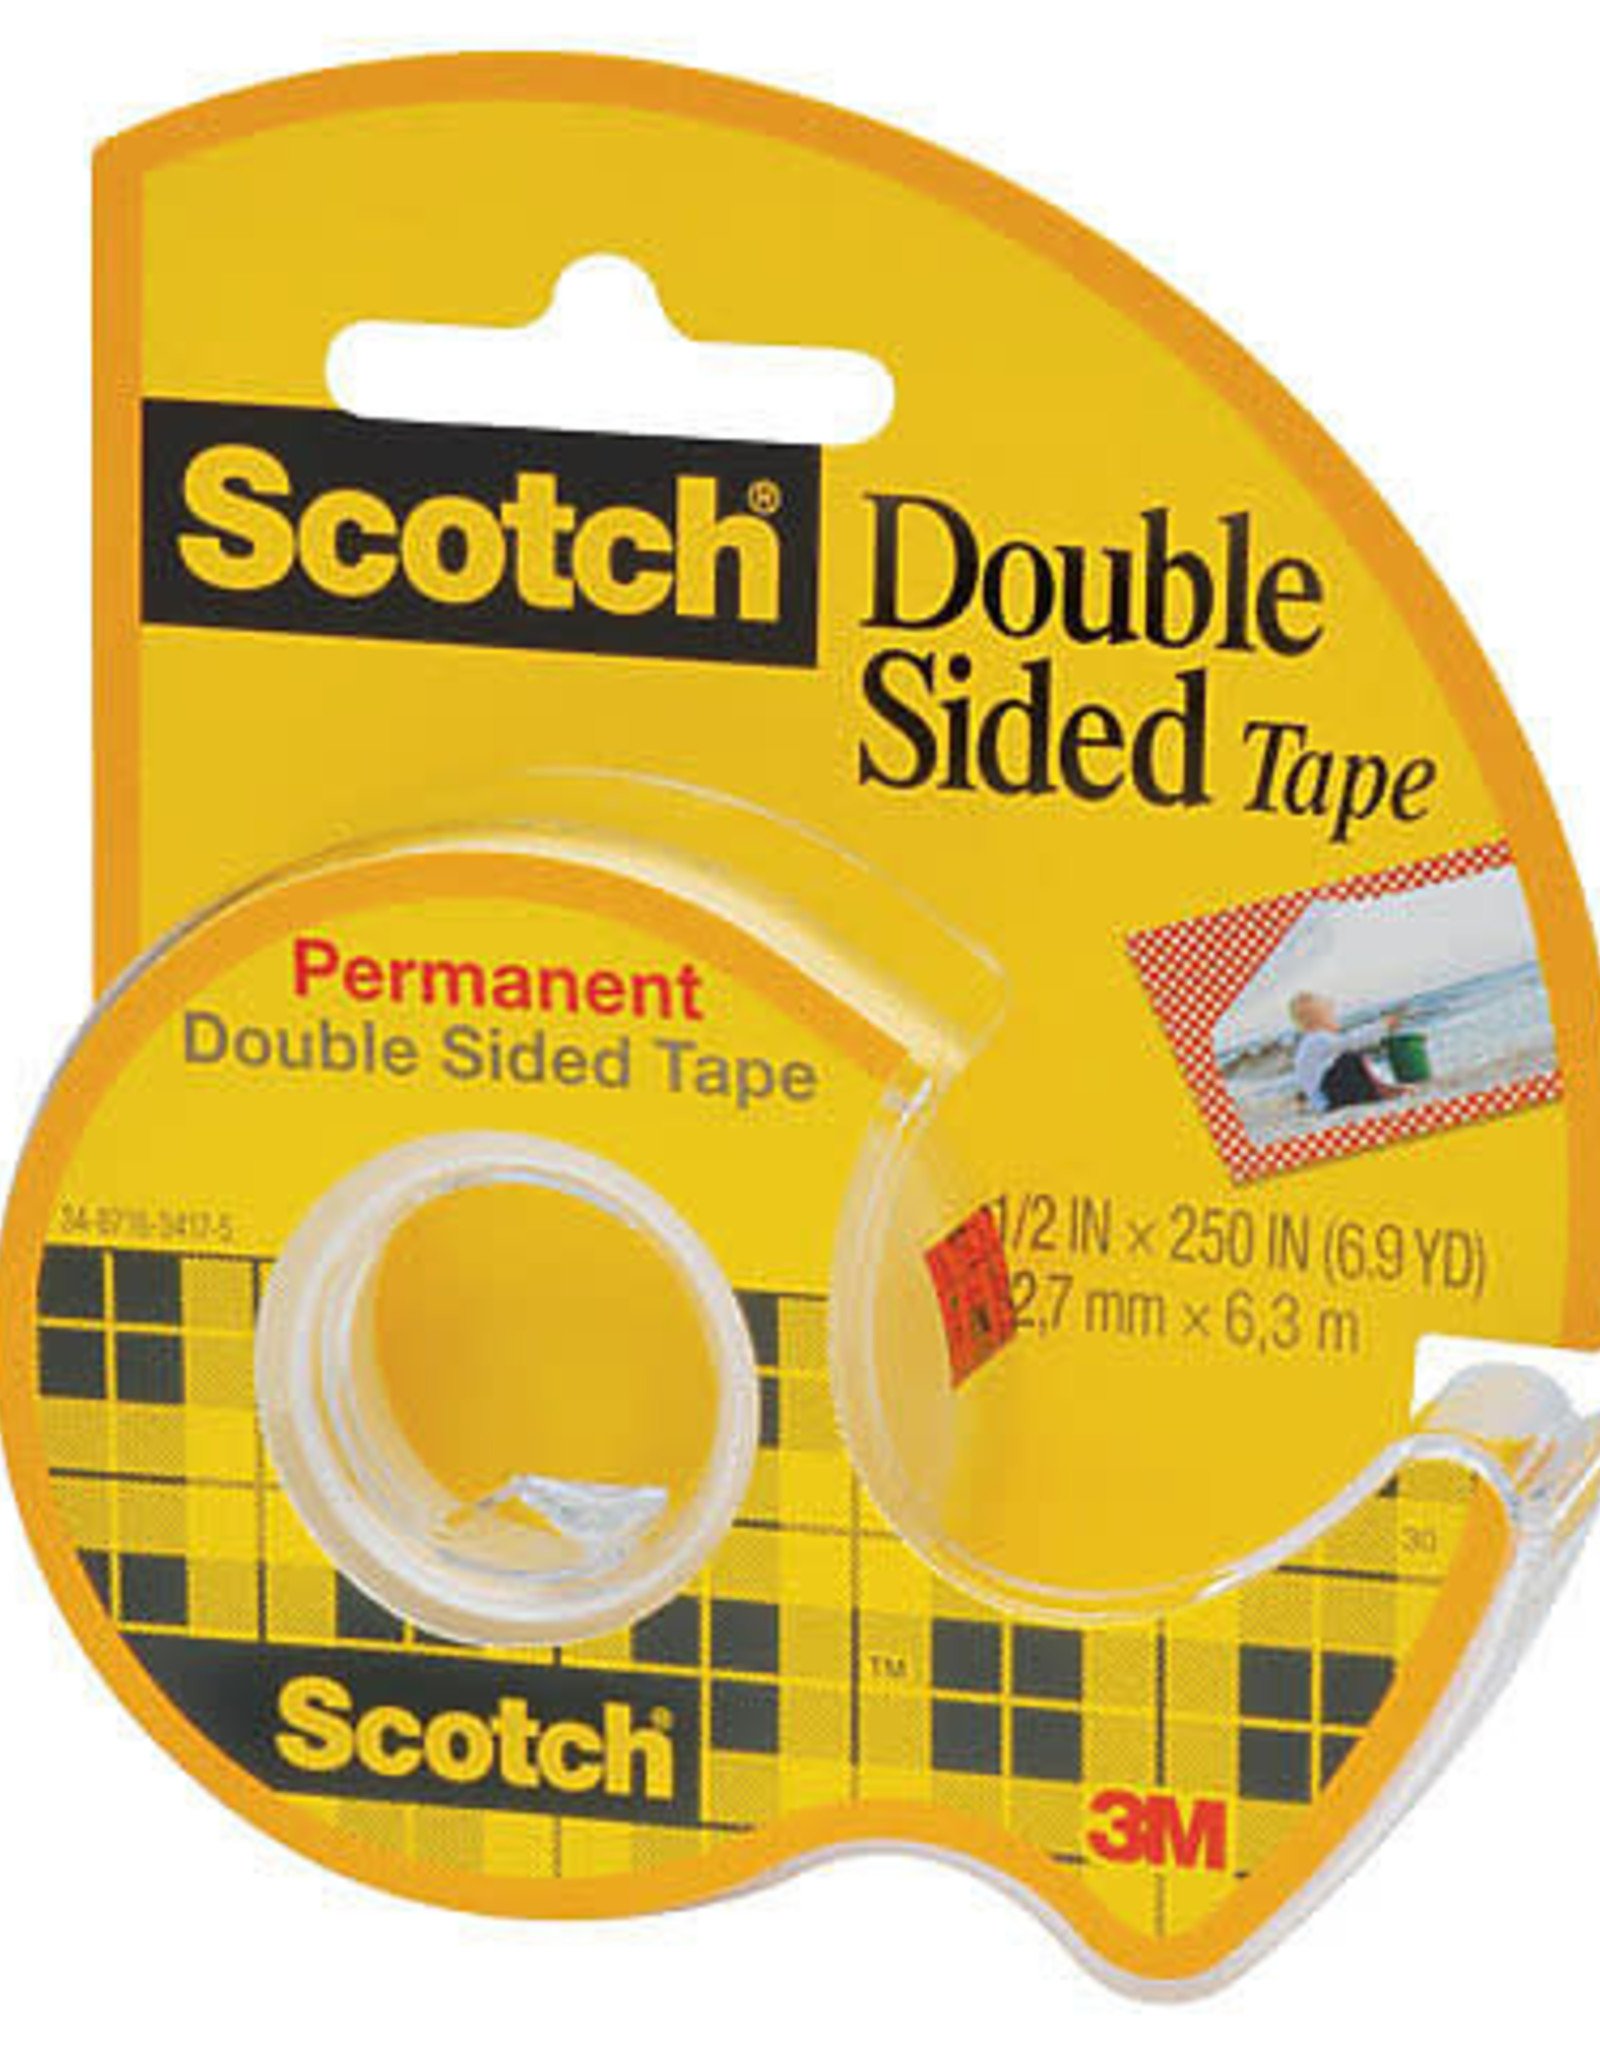 Permanent Double Sided Tape - Anderson Ranch ArtWorks Store